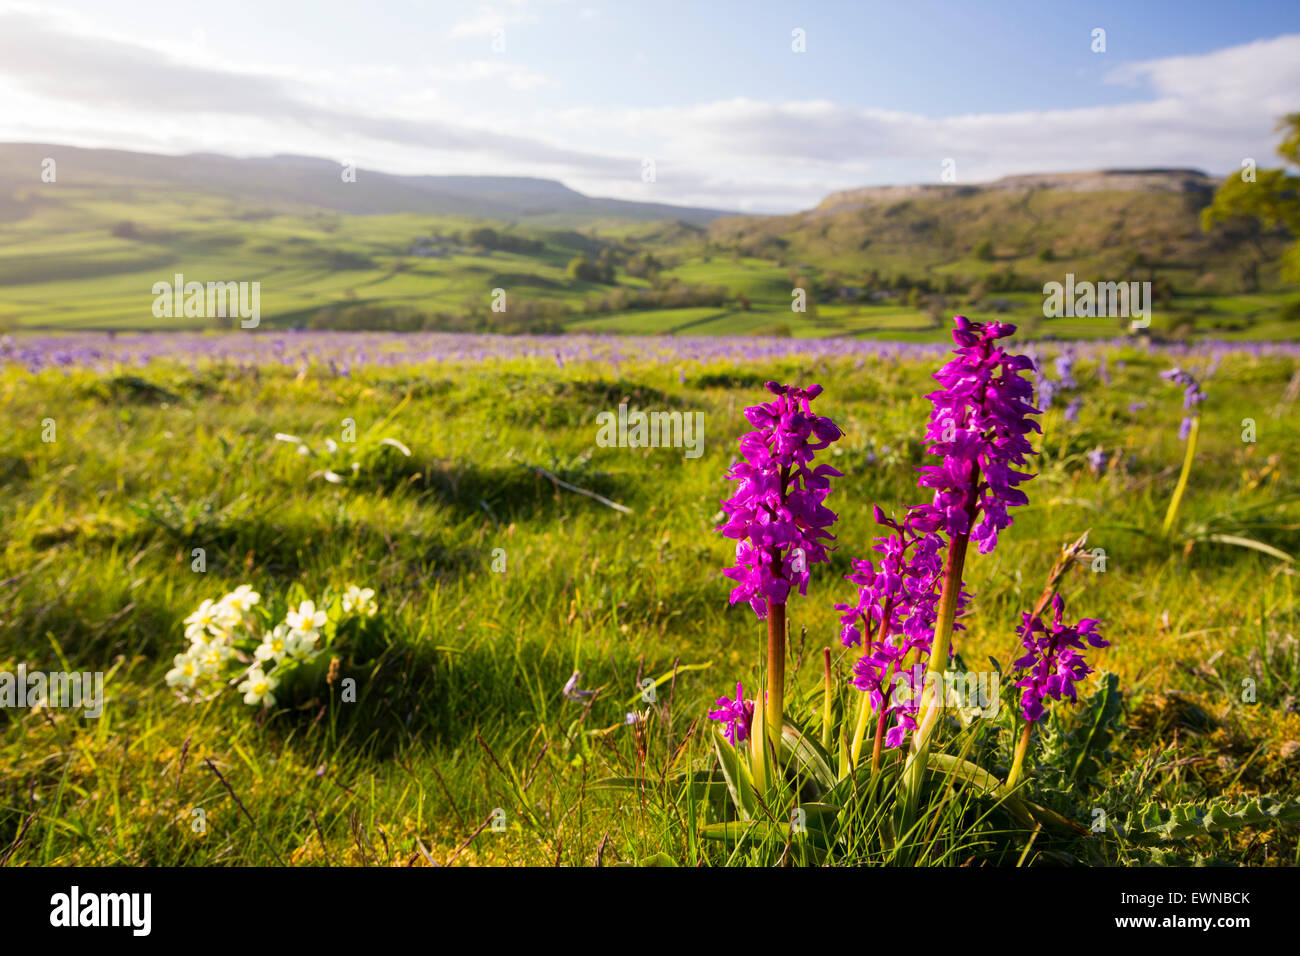 Bluebells, Primroses and an Early Purple Orchid (Orchis mascula) above Austwick in the Yorkshire Dales, UK. Stock Photo